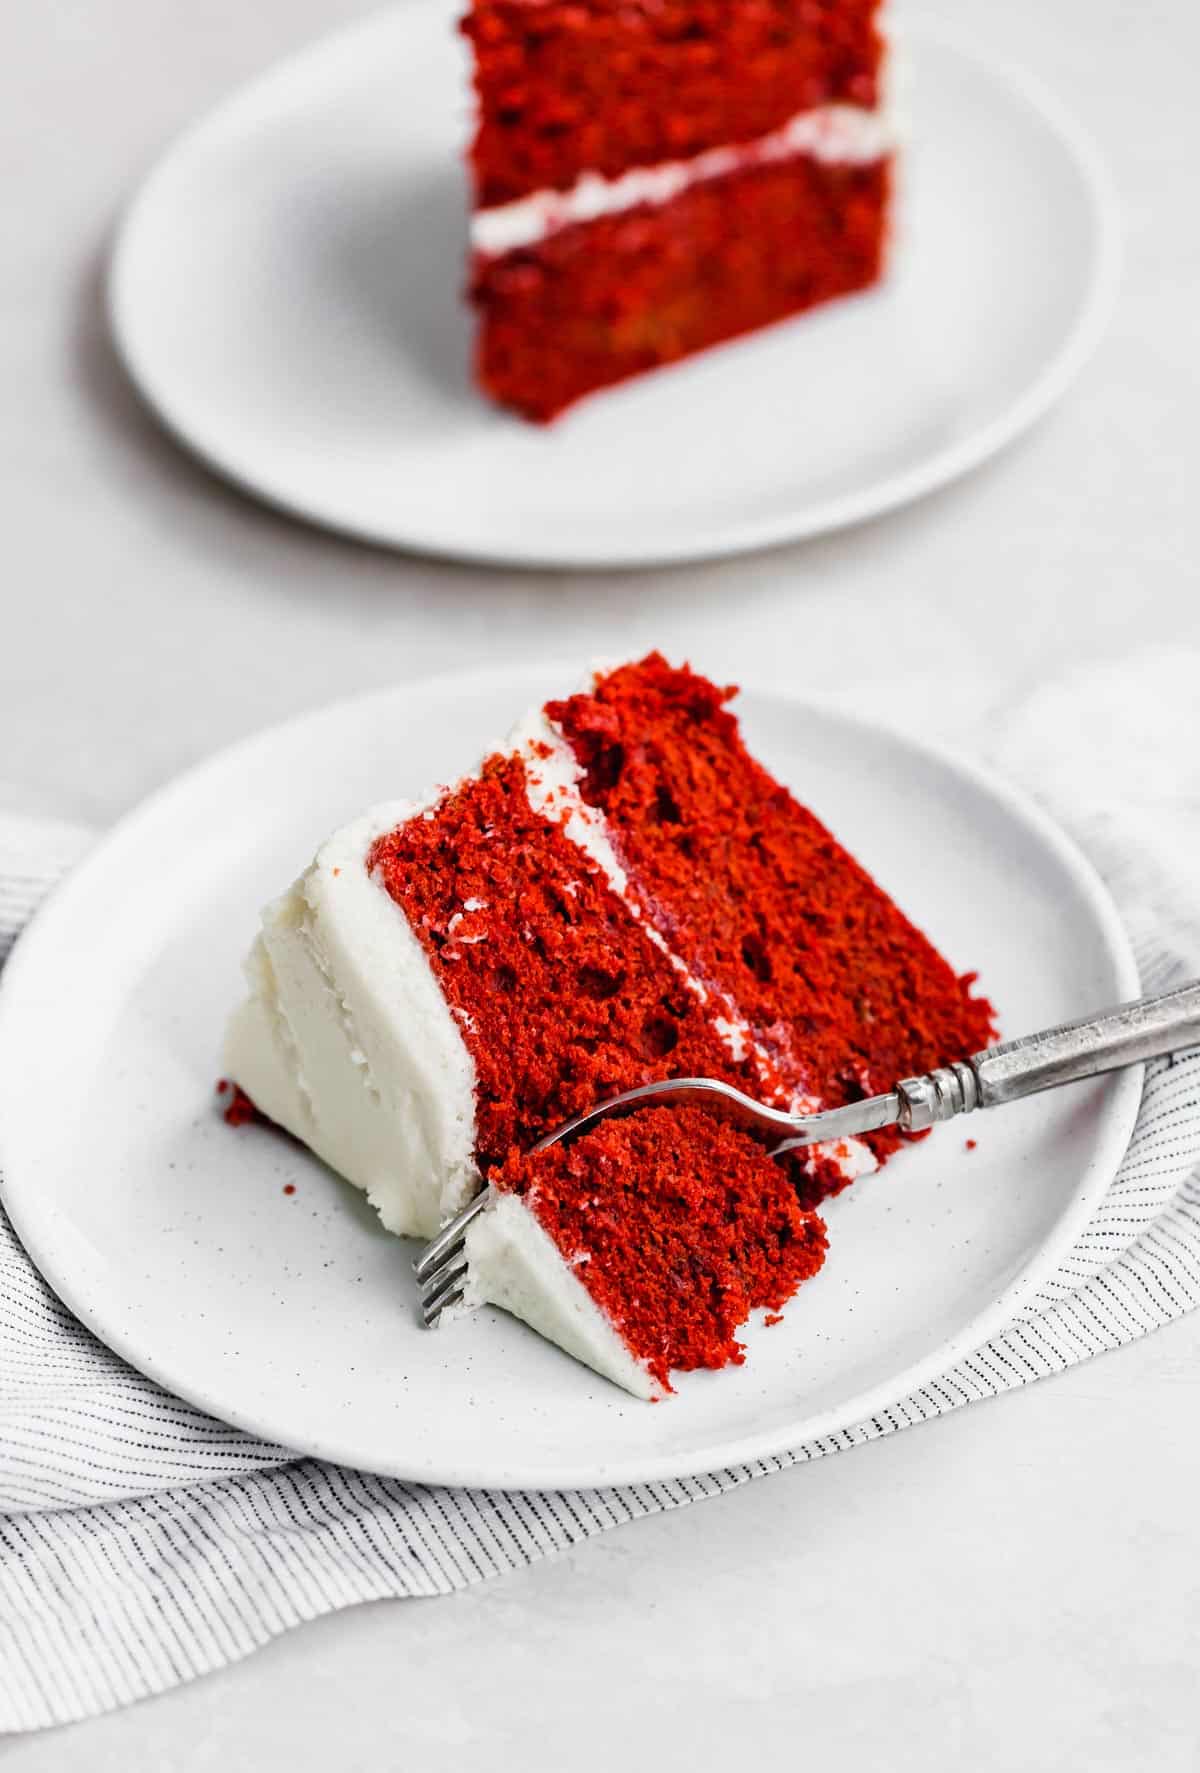 A slice of Old Fashioned Red Velvet Cake topped with old fashioned frosting on a white plate.